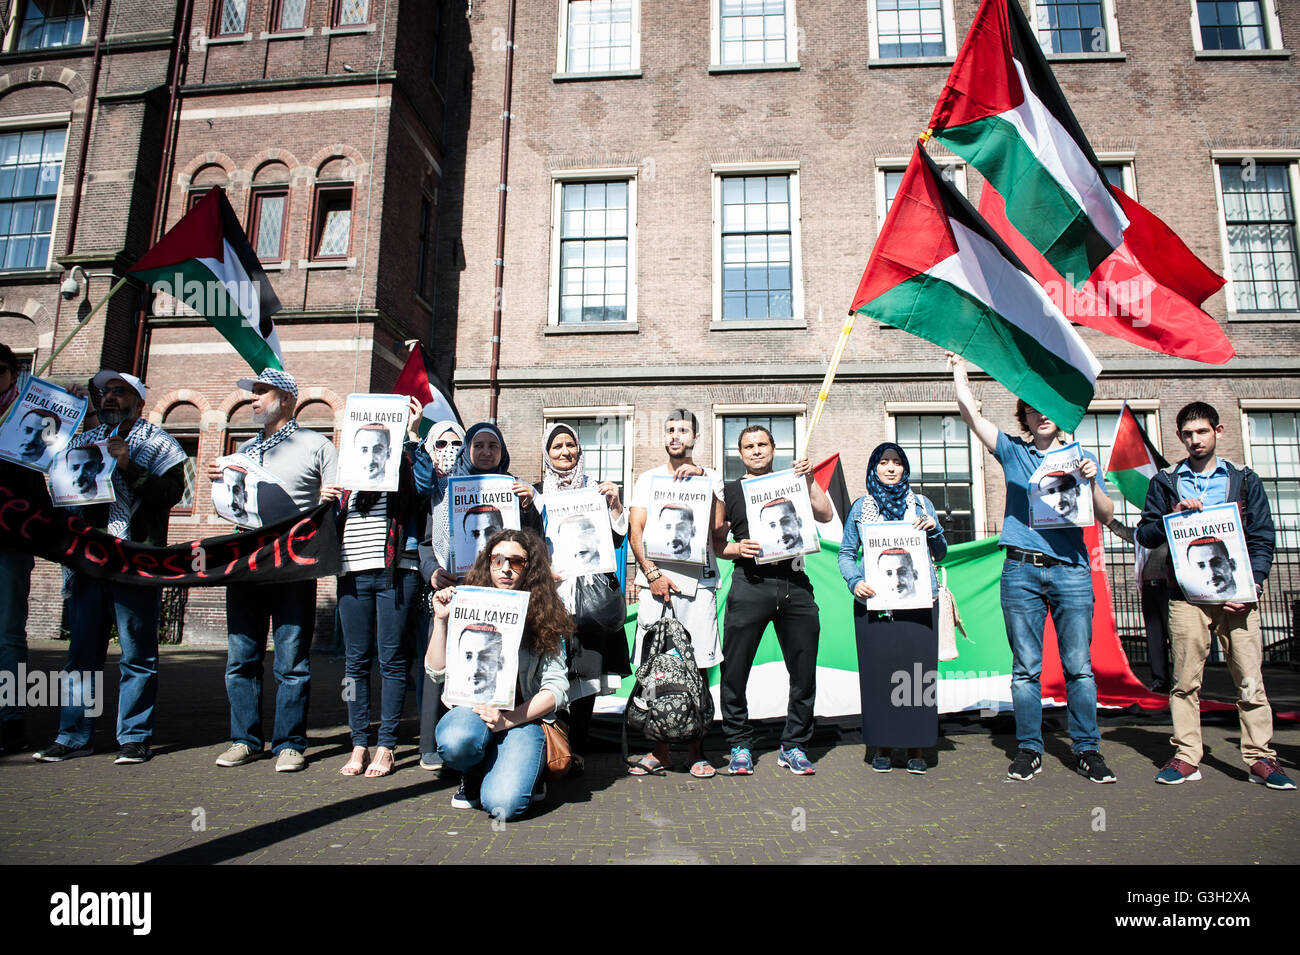 The Hague, The Netherlands. 24th June, 2016. 60 Palestinian prisoners in Megiddo prison are carrying out a hunger strike protest to demand freedom for Bilal Kayed, Palestinian prisoner held under Israeli administrative detention and on hunger strike in Ramon prison. Over 100 international and Palestinian organizations have called for actions in support of Kayed's freedom on 24 and 25 June; hundreds of prisoners will be conducting a two-day hunger strike protest on those days. Credit:  Romy Arroyo Fernandez/Alamy Live News Stock Photo